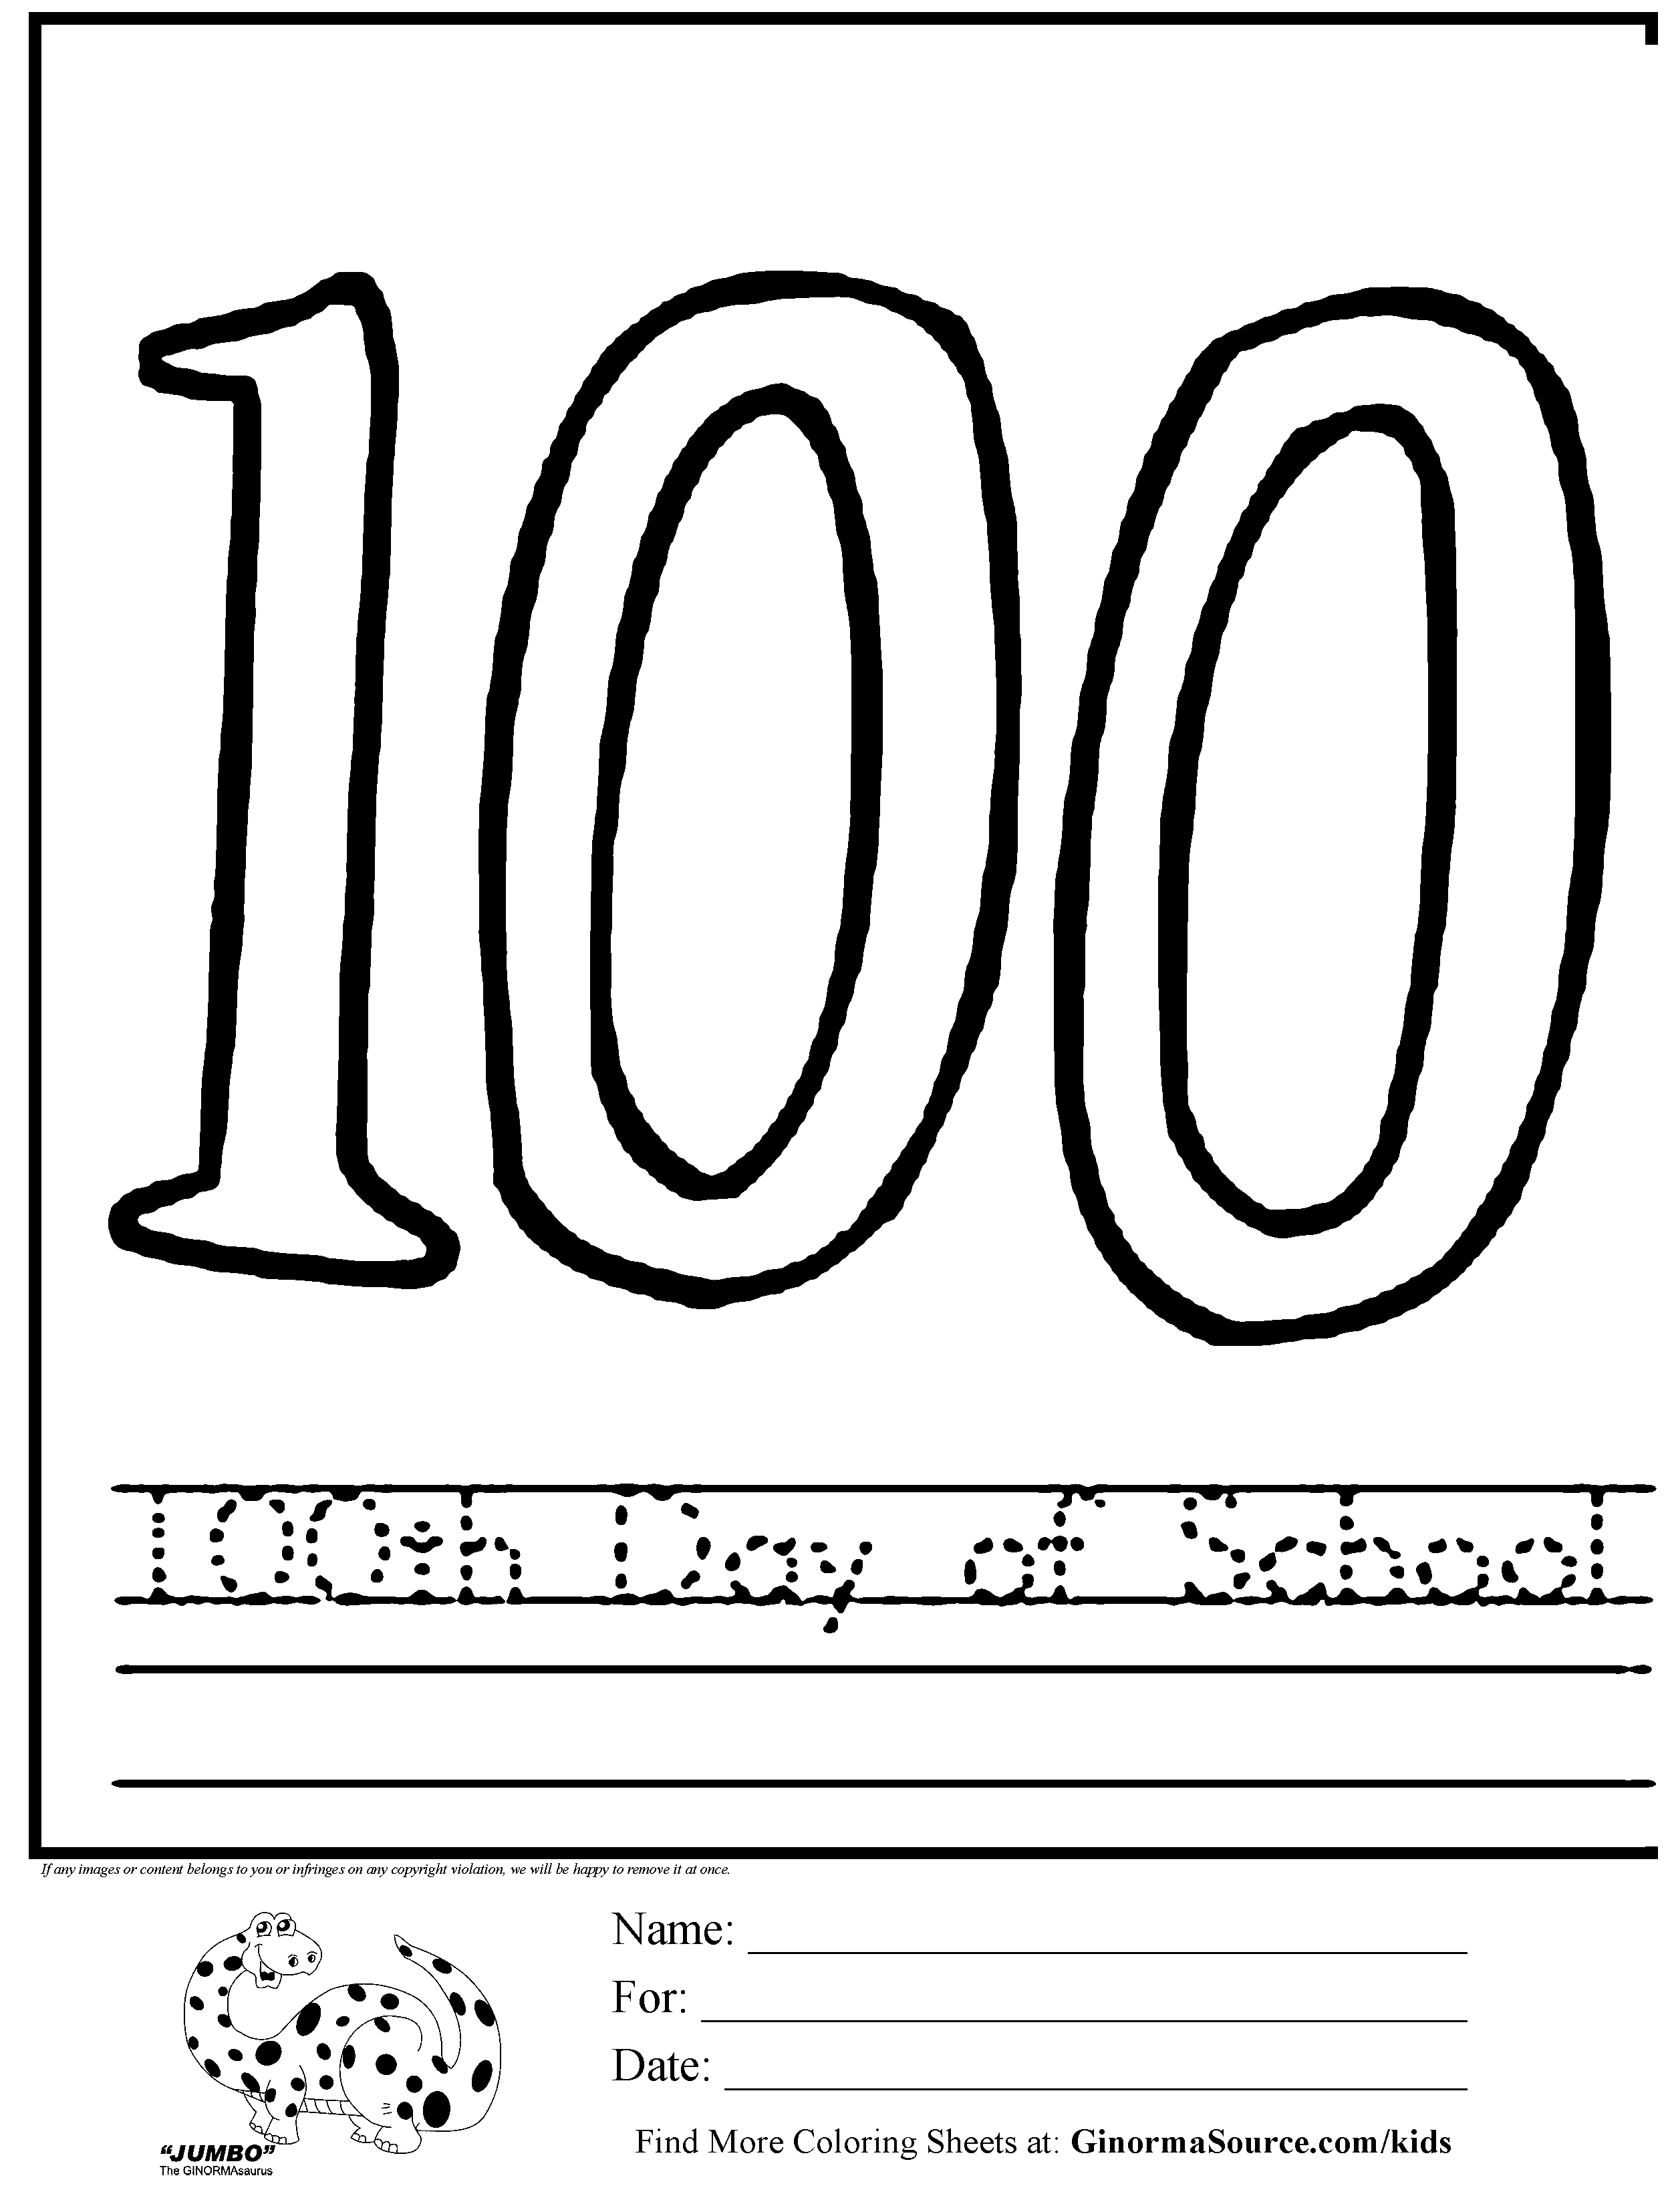 100-days-of-school-activities-games-and-printables-kidssoup